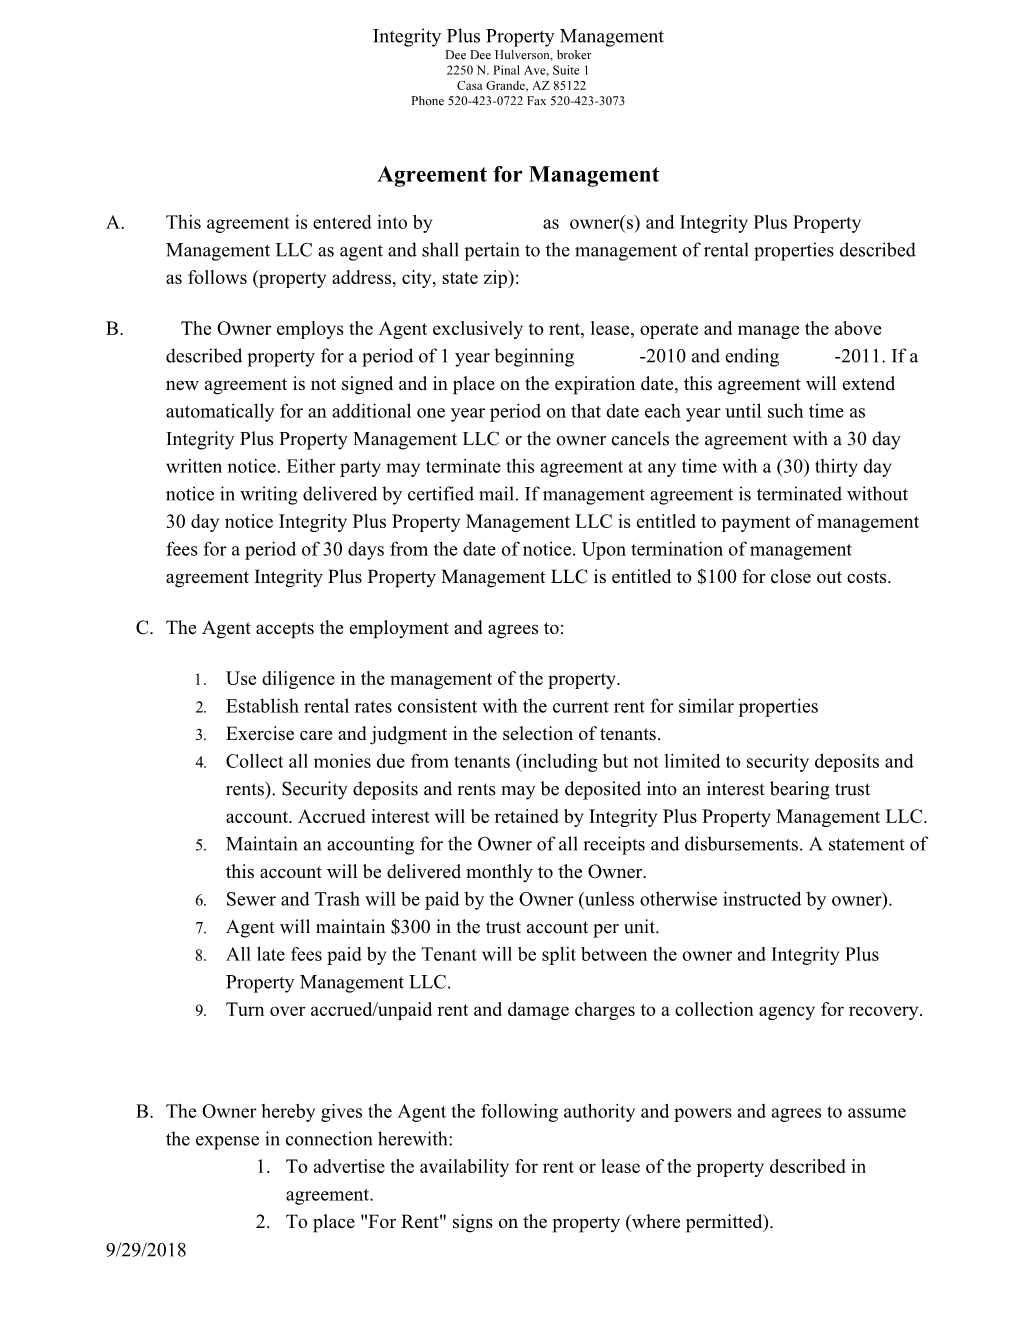 This Agreement Is Entered Into By______ As Owner(S) and Integrity Plus Property Management